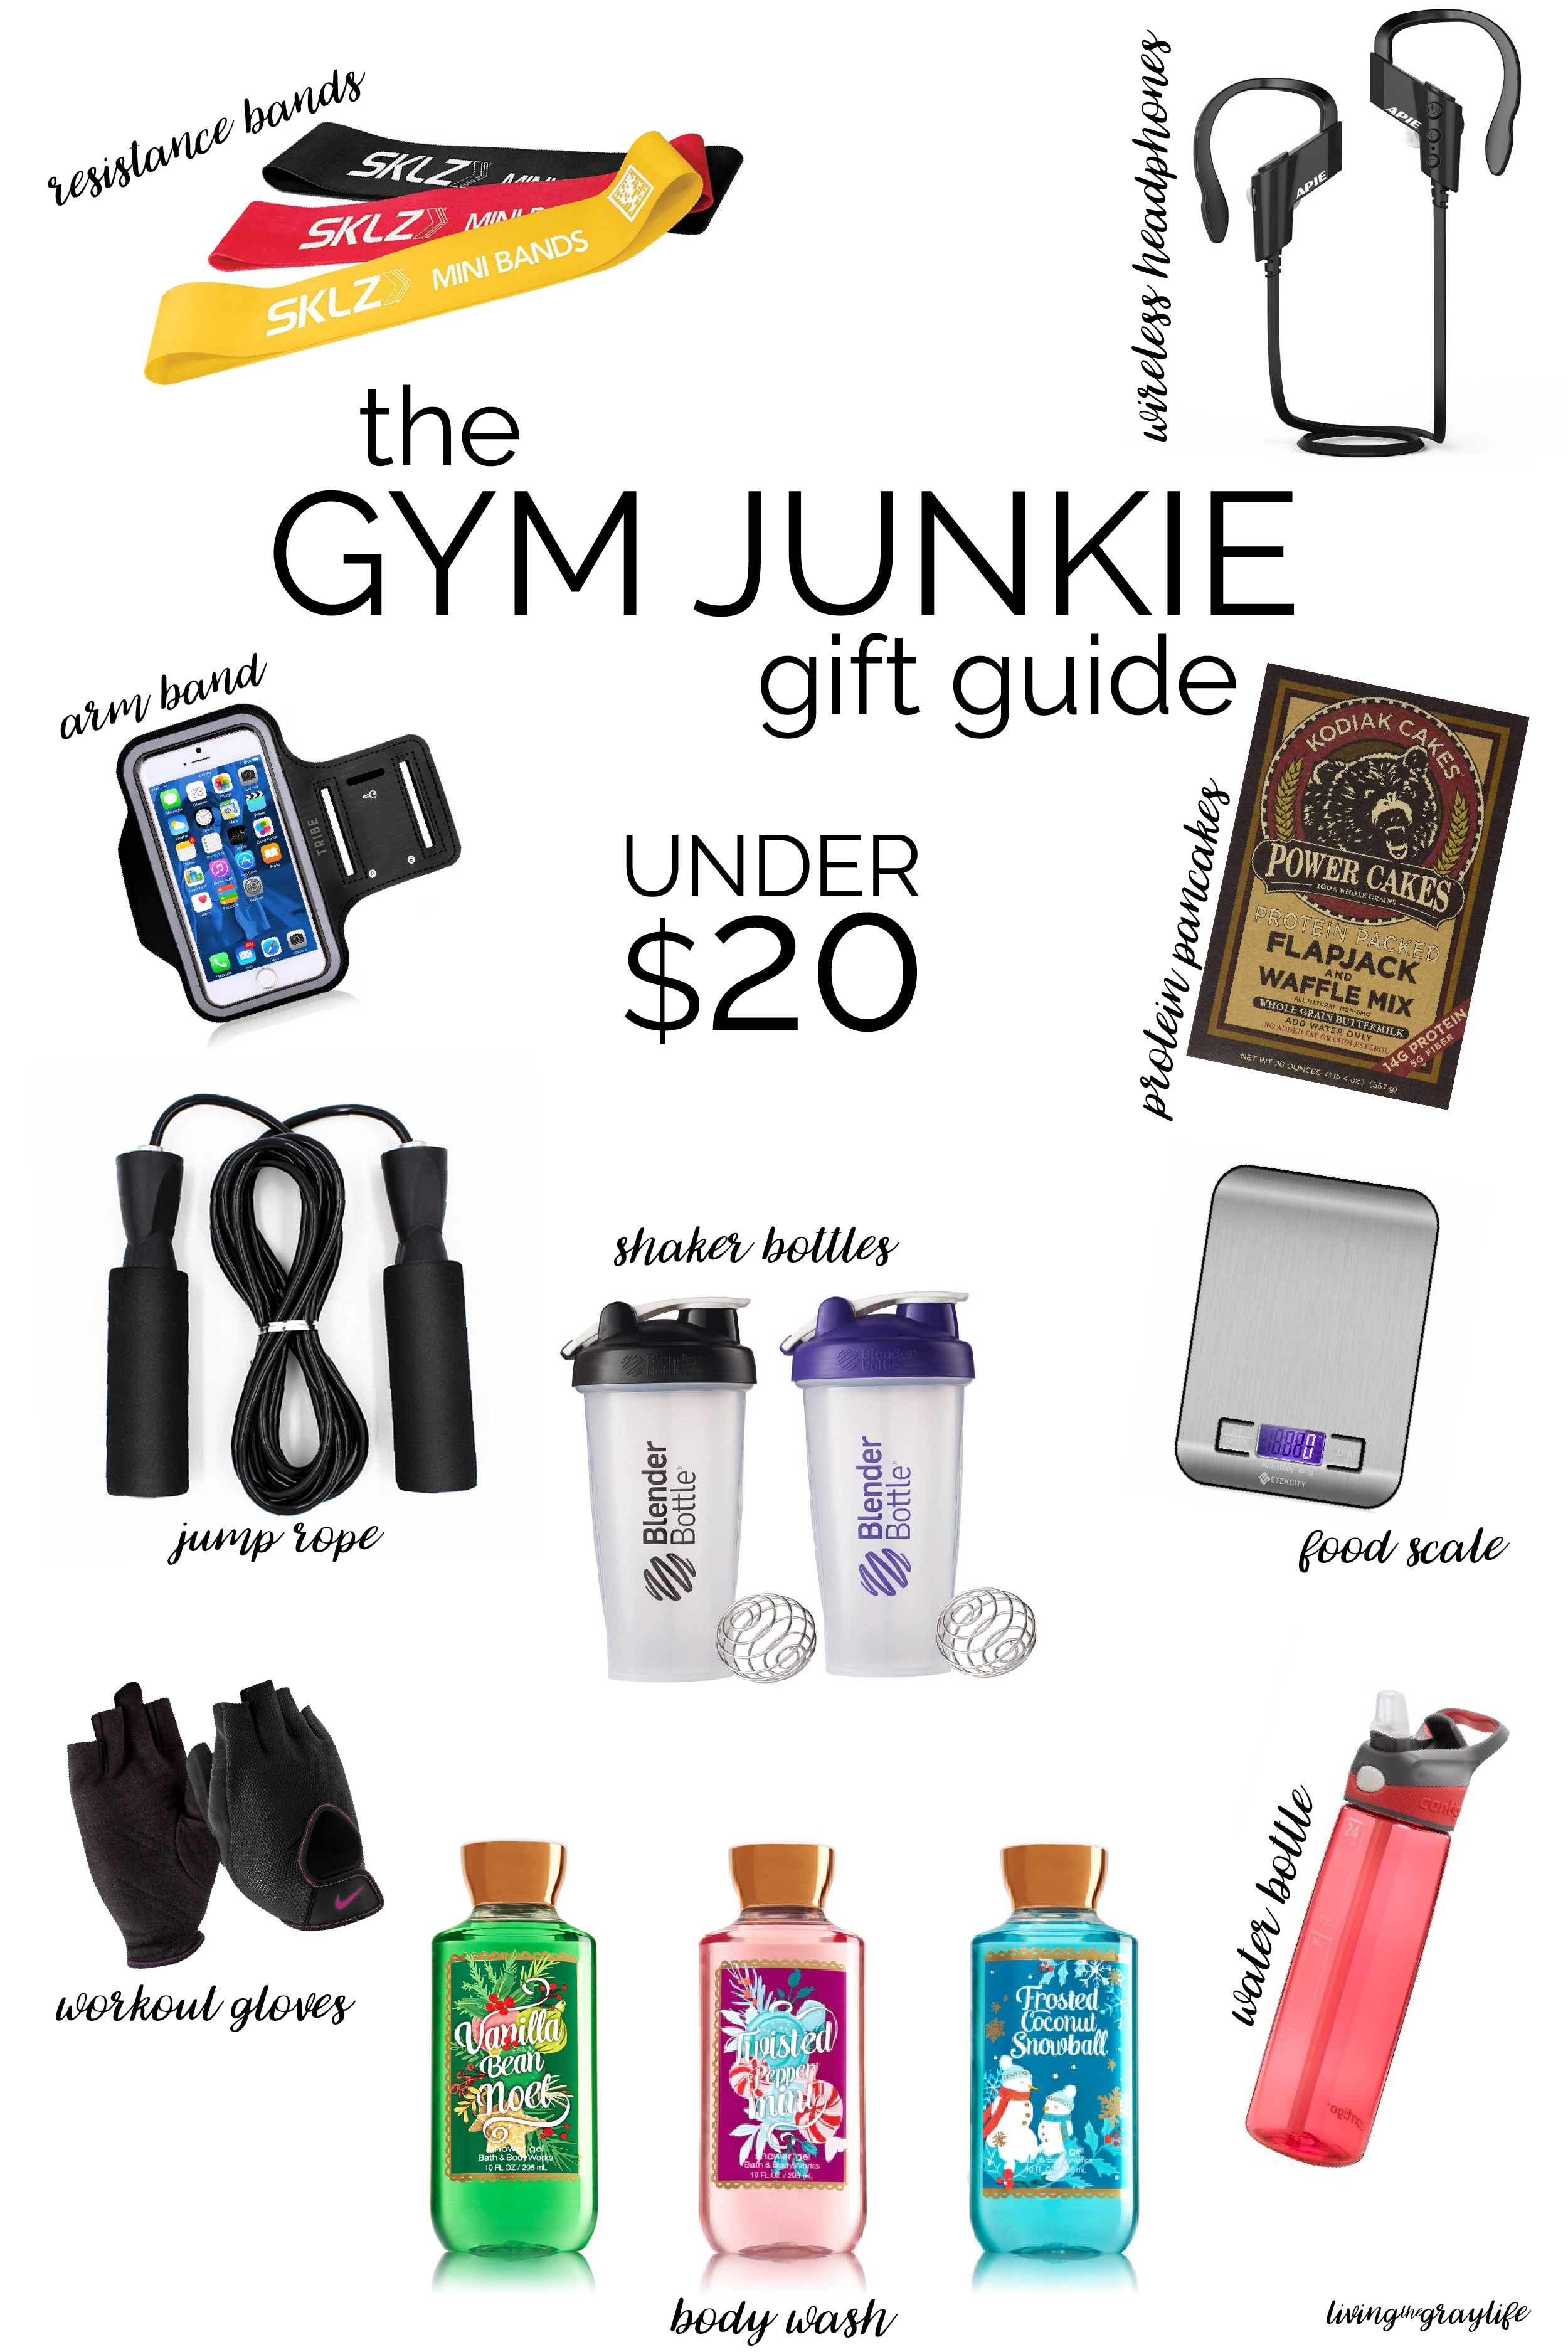 FITNESS GIFT GUIDE. Perfect gifts for the gym junkie in your life. All under $20! | Gym Junkie Gift Guide